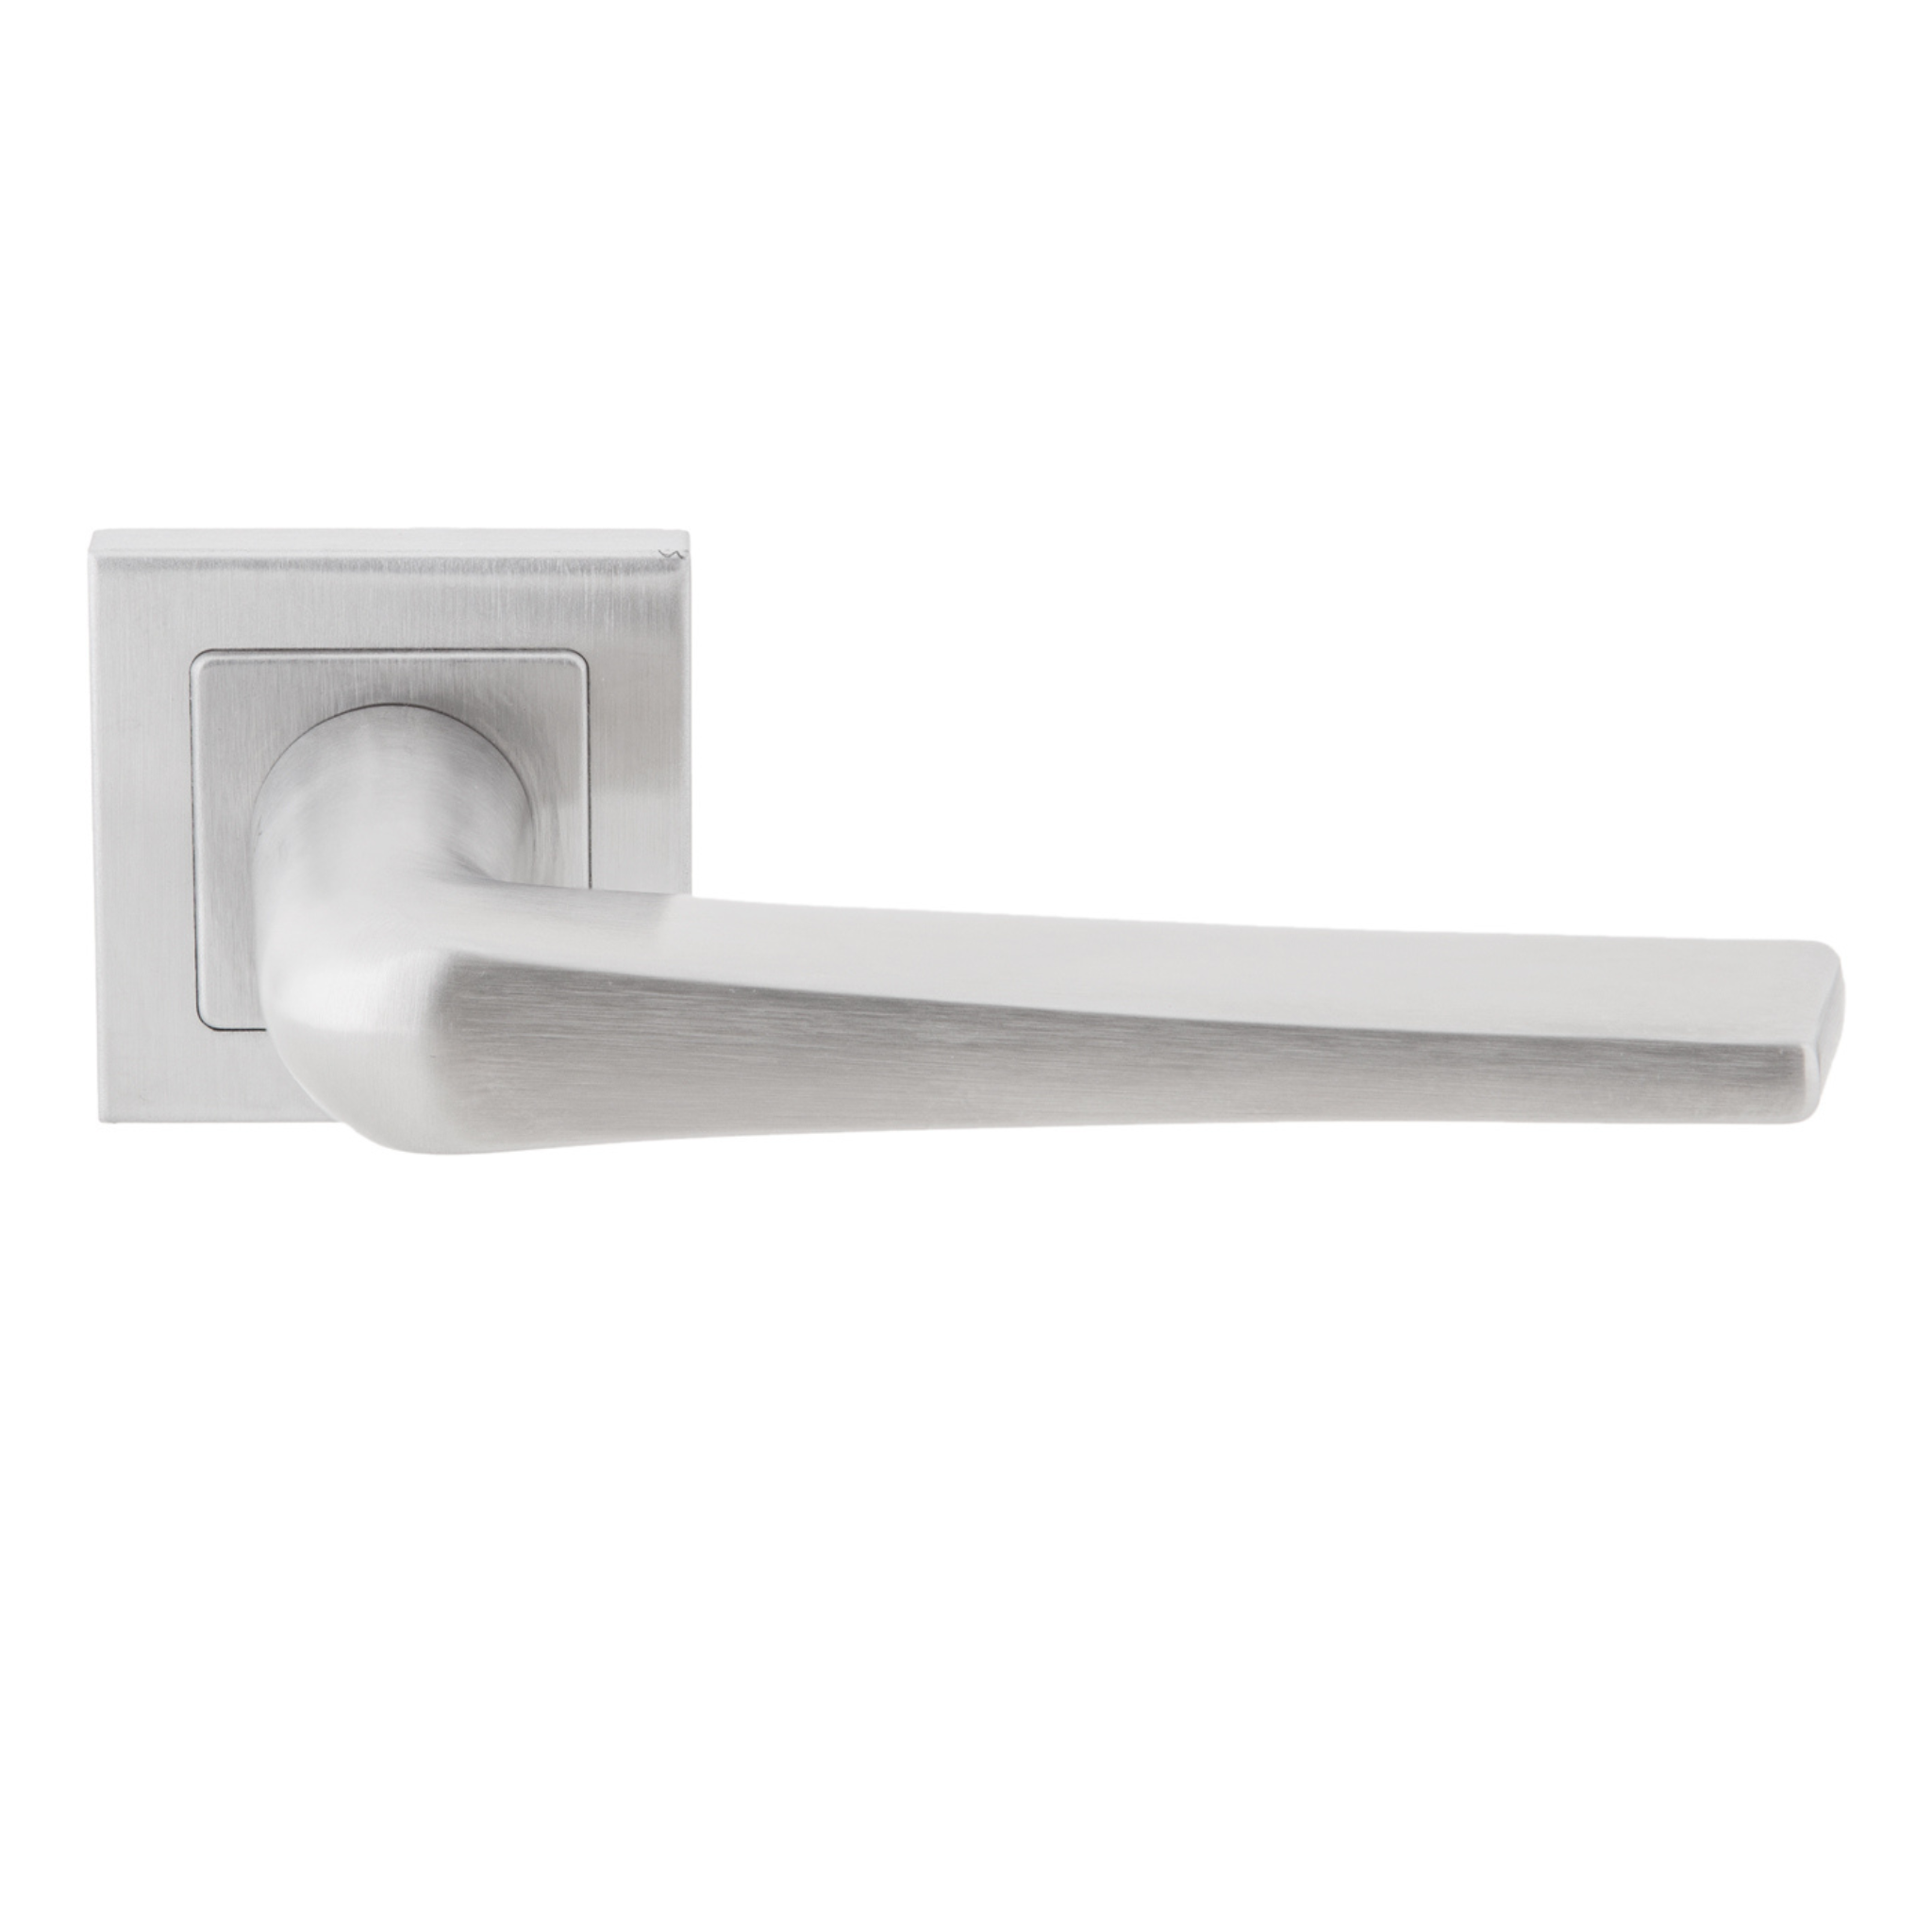 DSQ 903, Lever Handles, Square, On Square Rose, With Escutcheons, 148mm (l), Stainless Steel, DORMAKABA